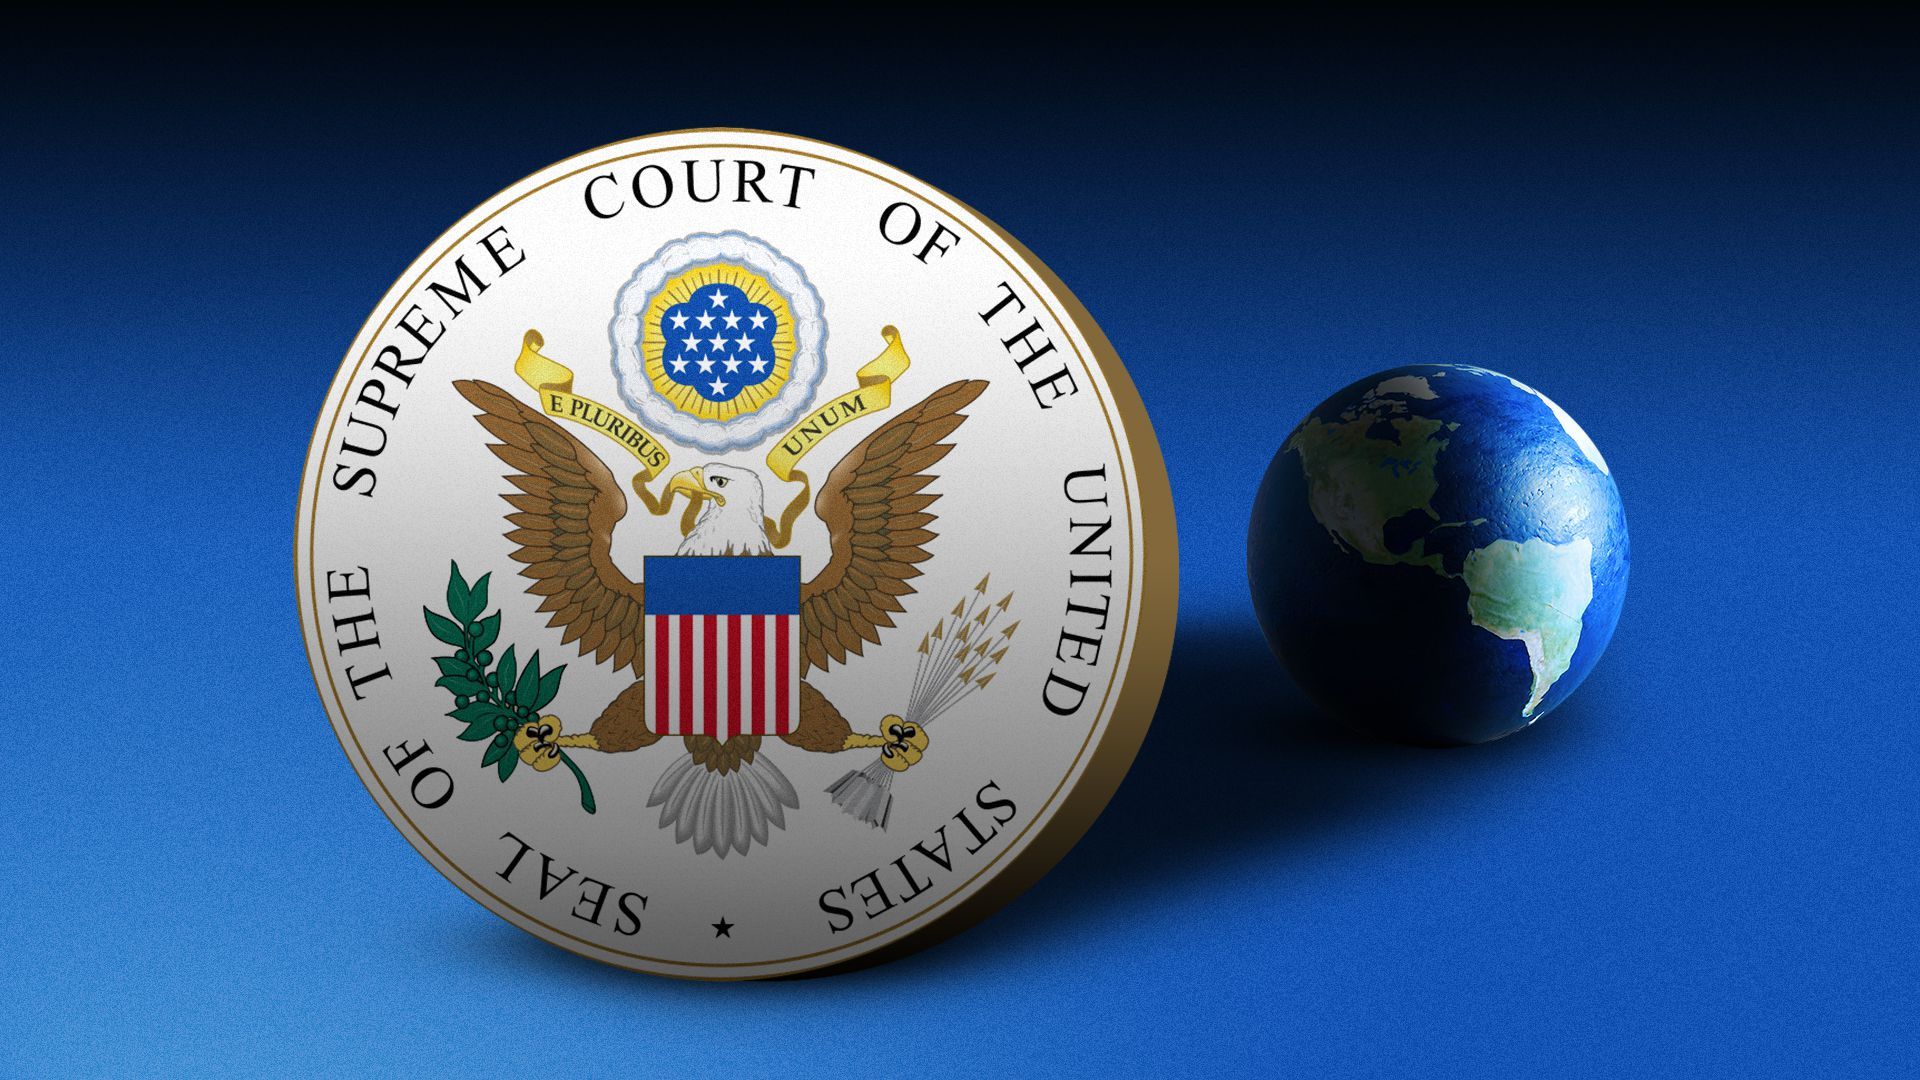 Illustration of the SCOTUS seal casting a shadow on the planet Earth